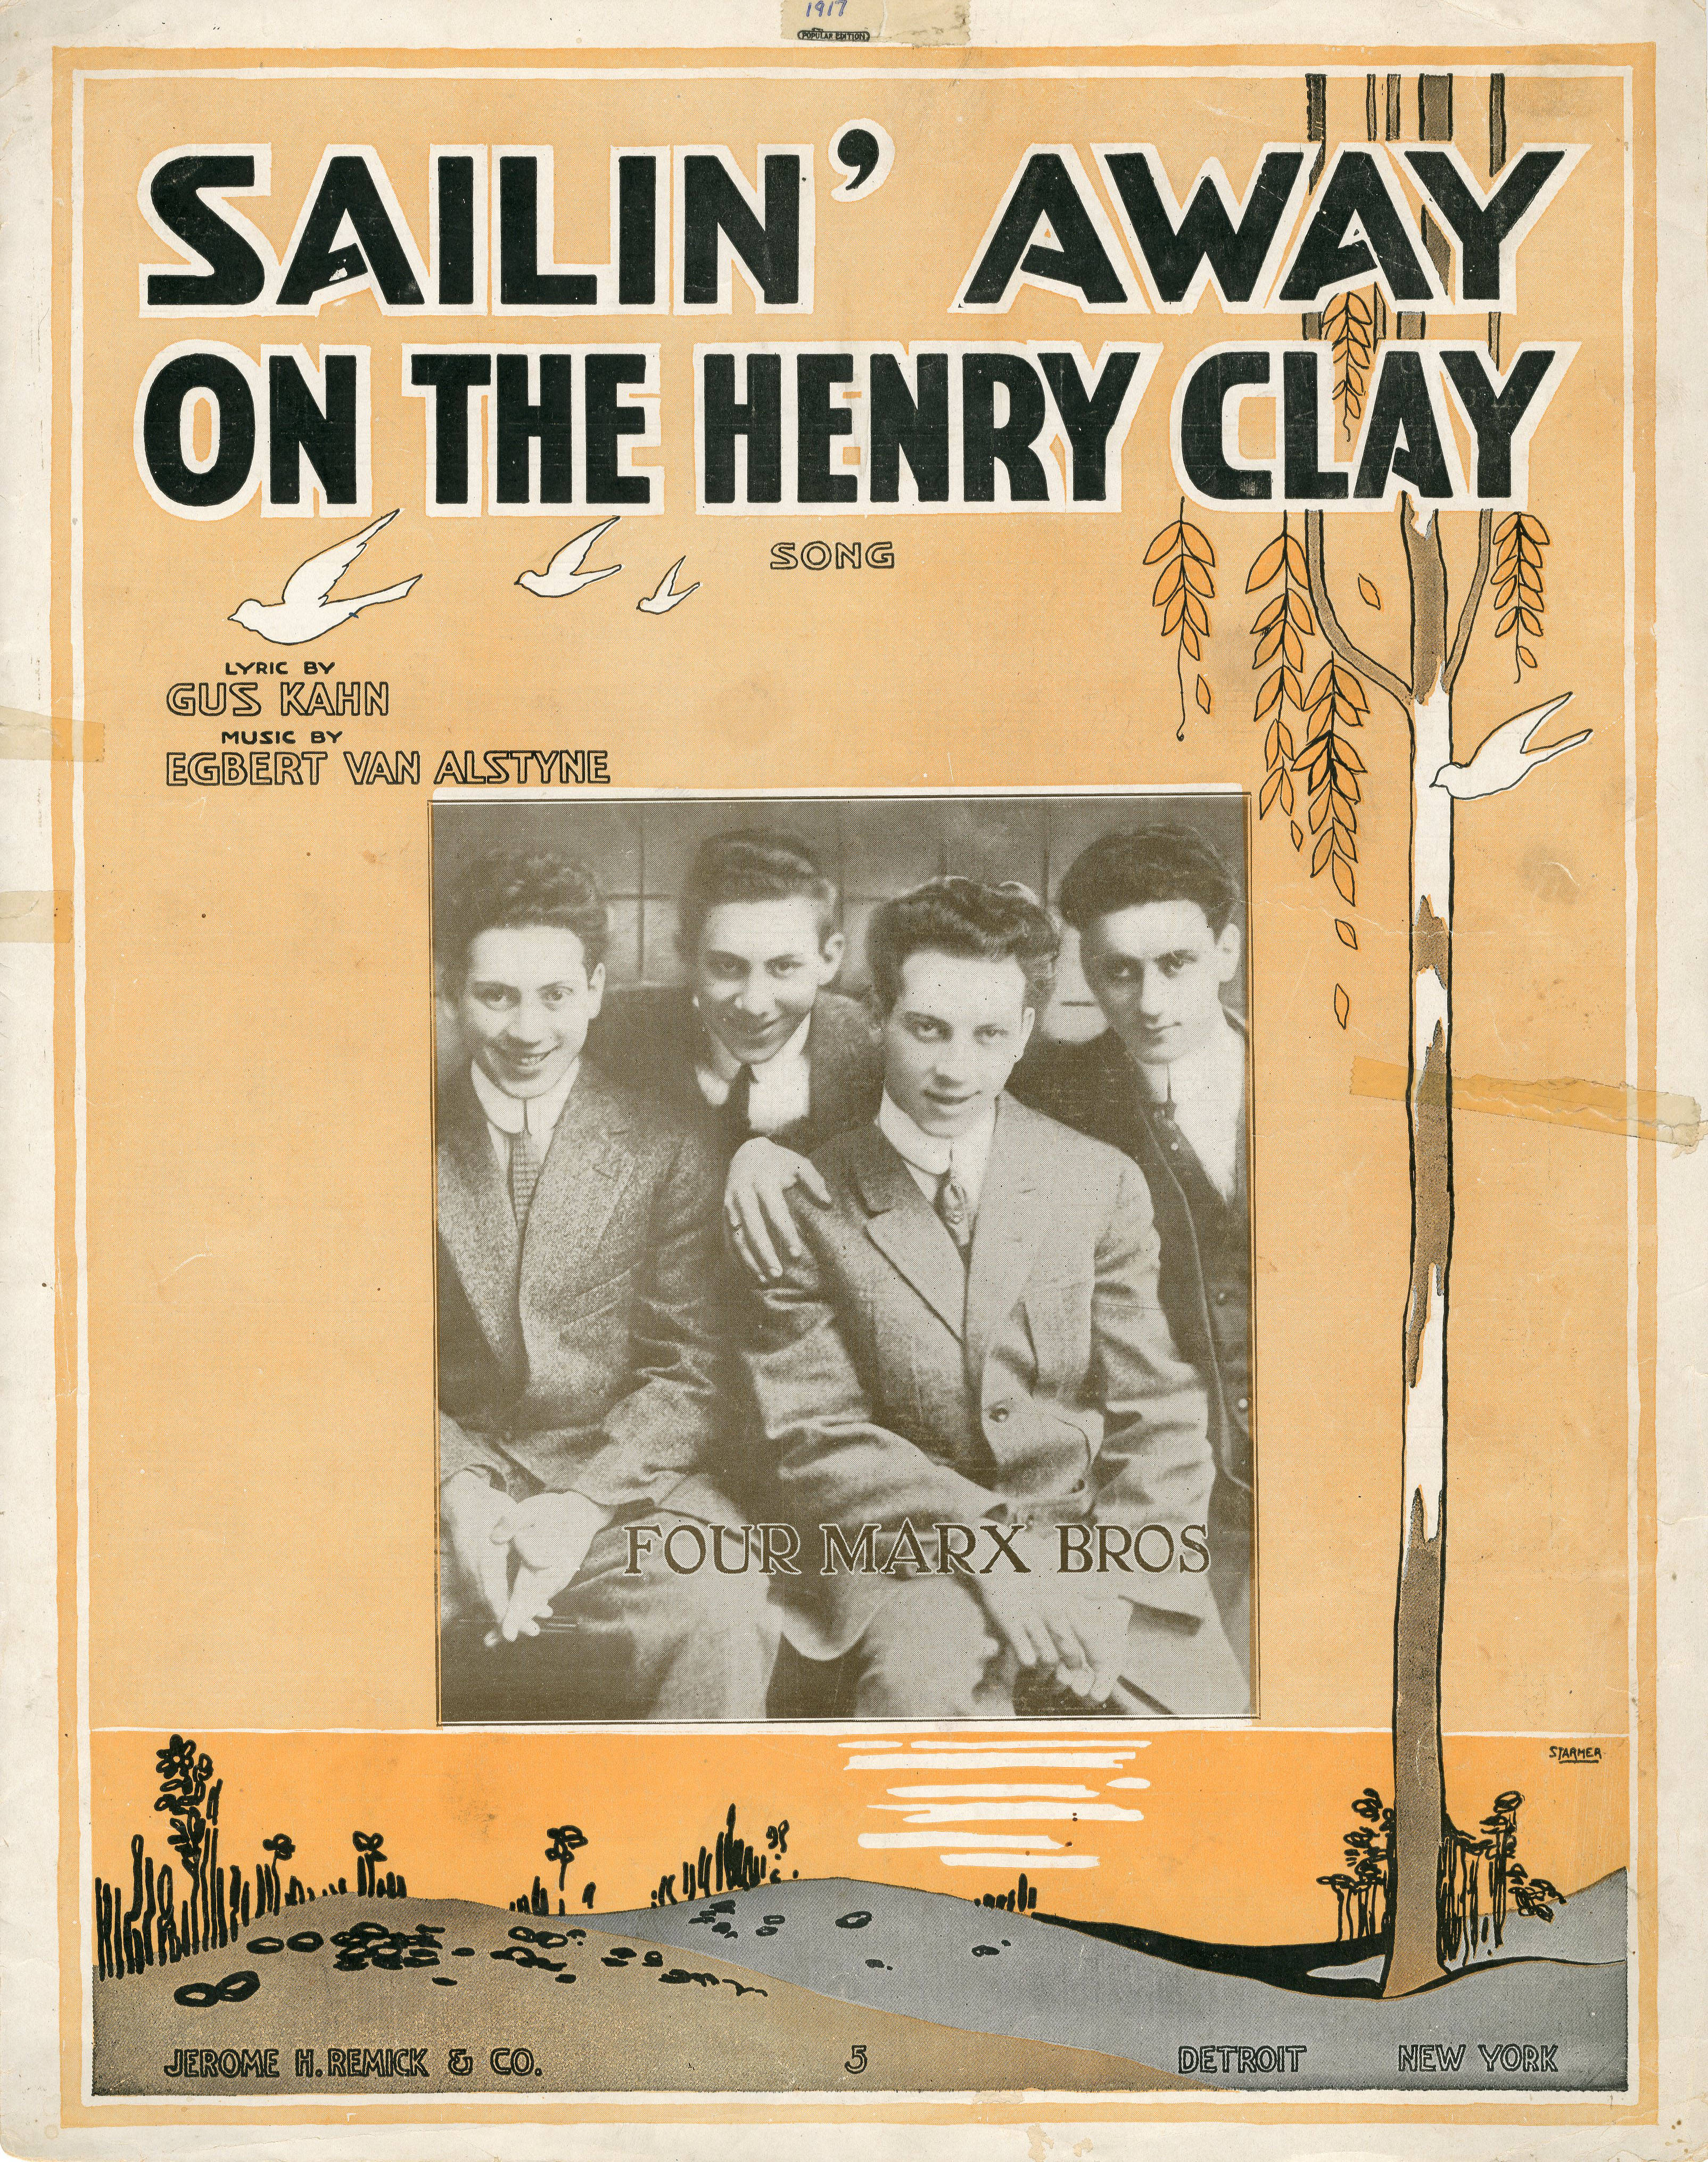 Sheet music cover - SAILIN' AWAY ON THE HENRY CLAY - SONG (1917)